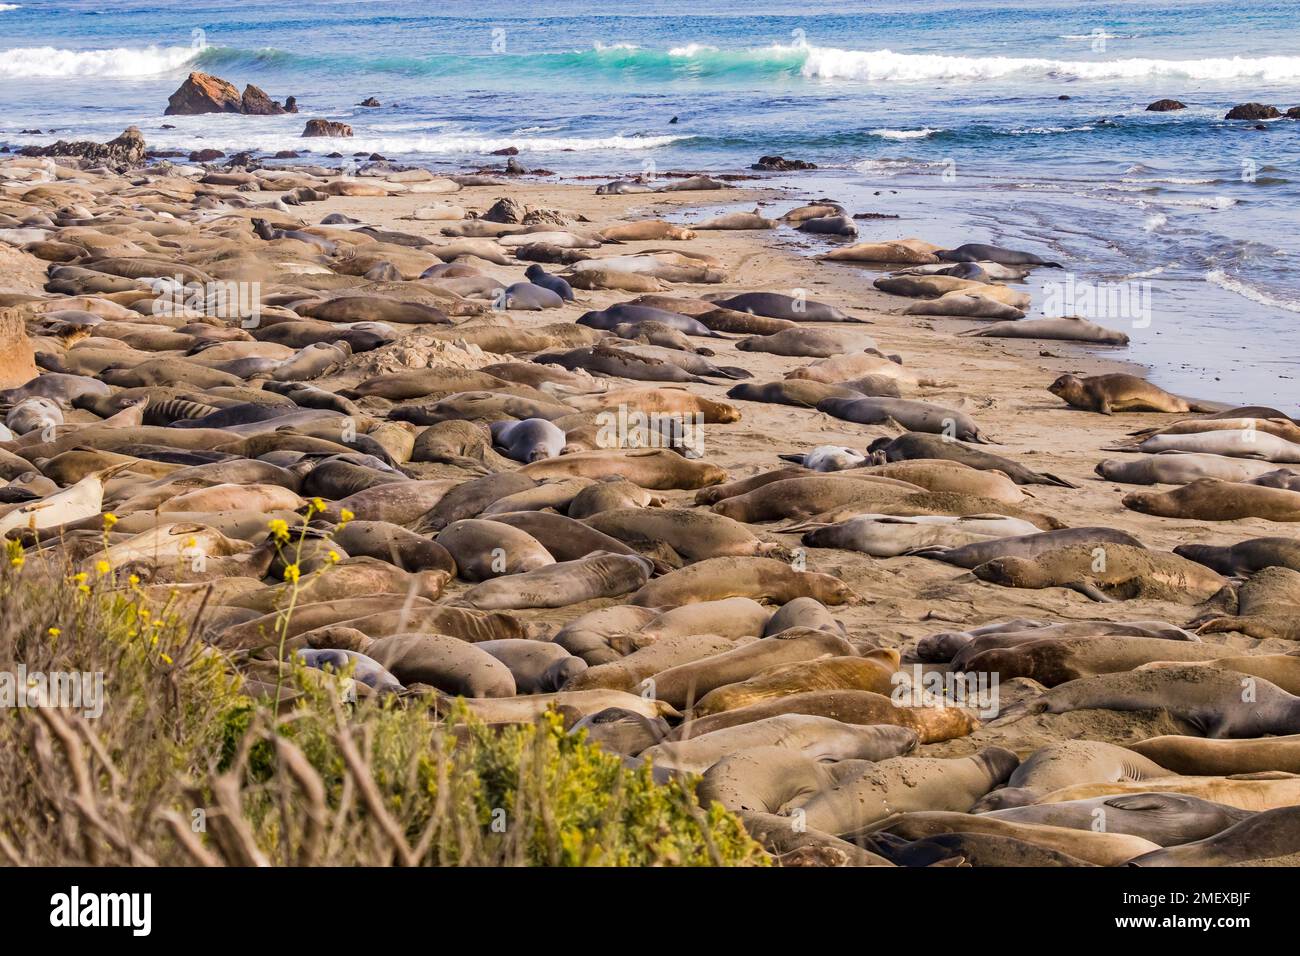 The colony of elephant seals at Elephant Seal Vista Point viewpoint near San Simeon on Highway Number One, California, USA West Stock Photo